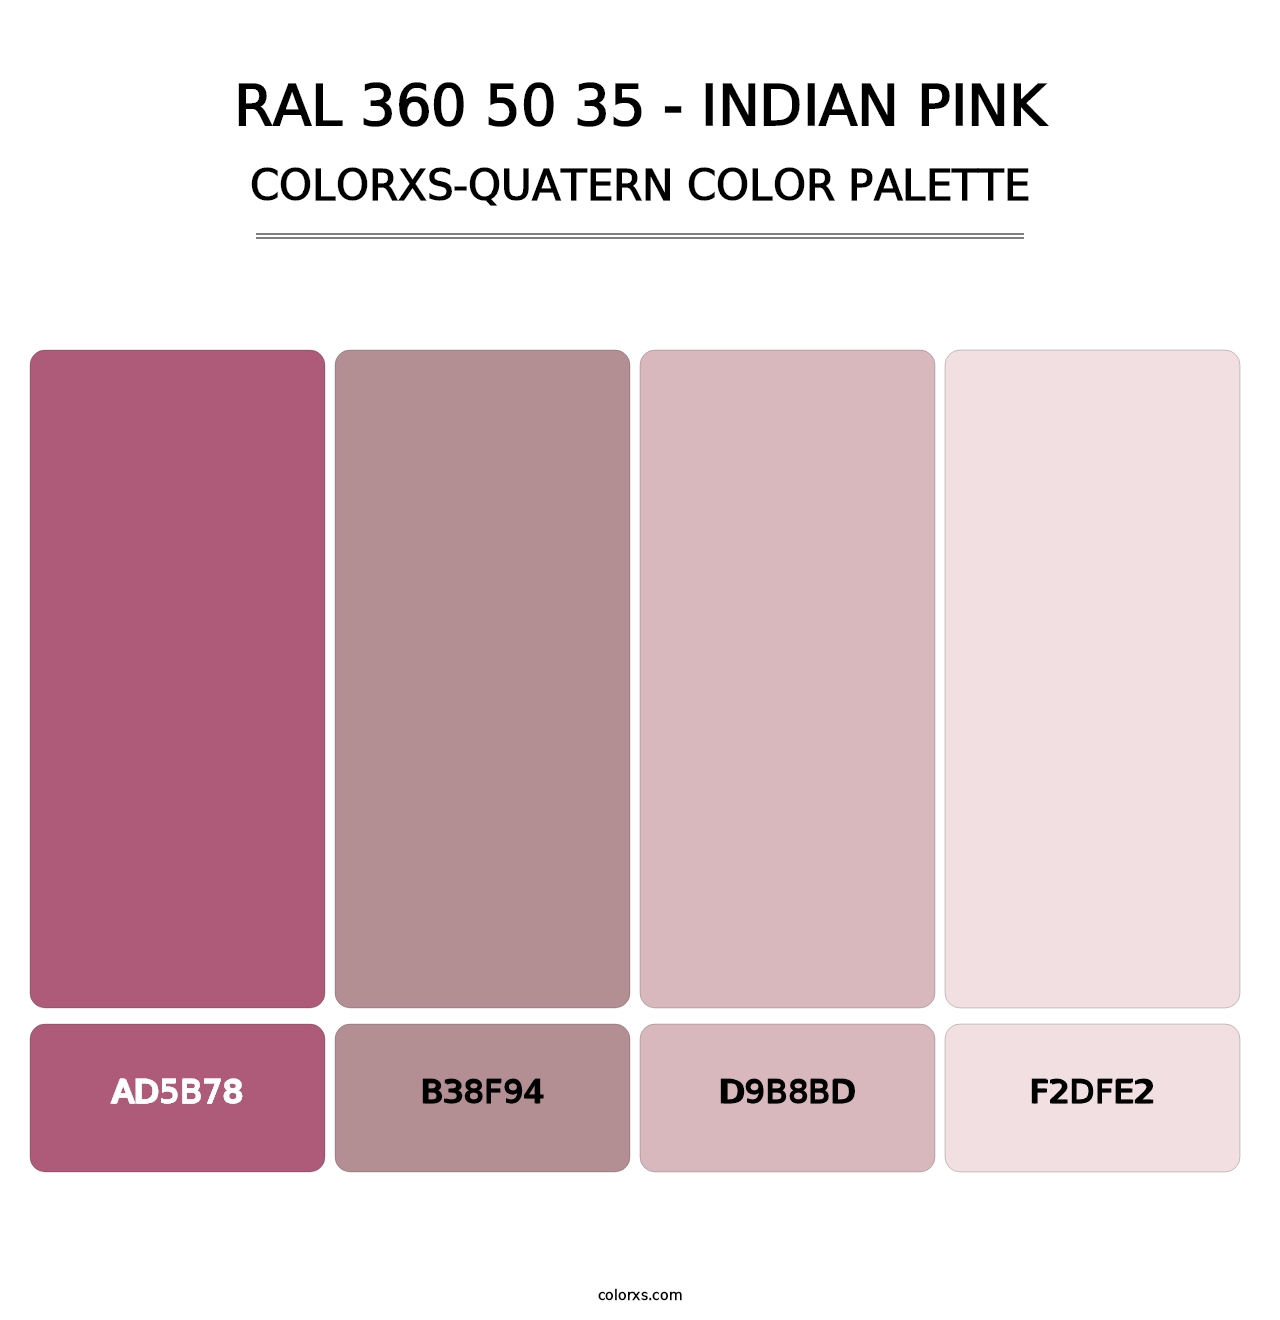 RAL 360 50 35 - Indian Pink - Colorxs Quatern Palette